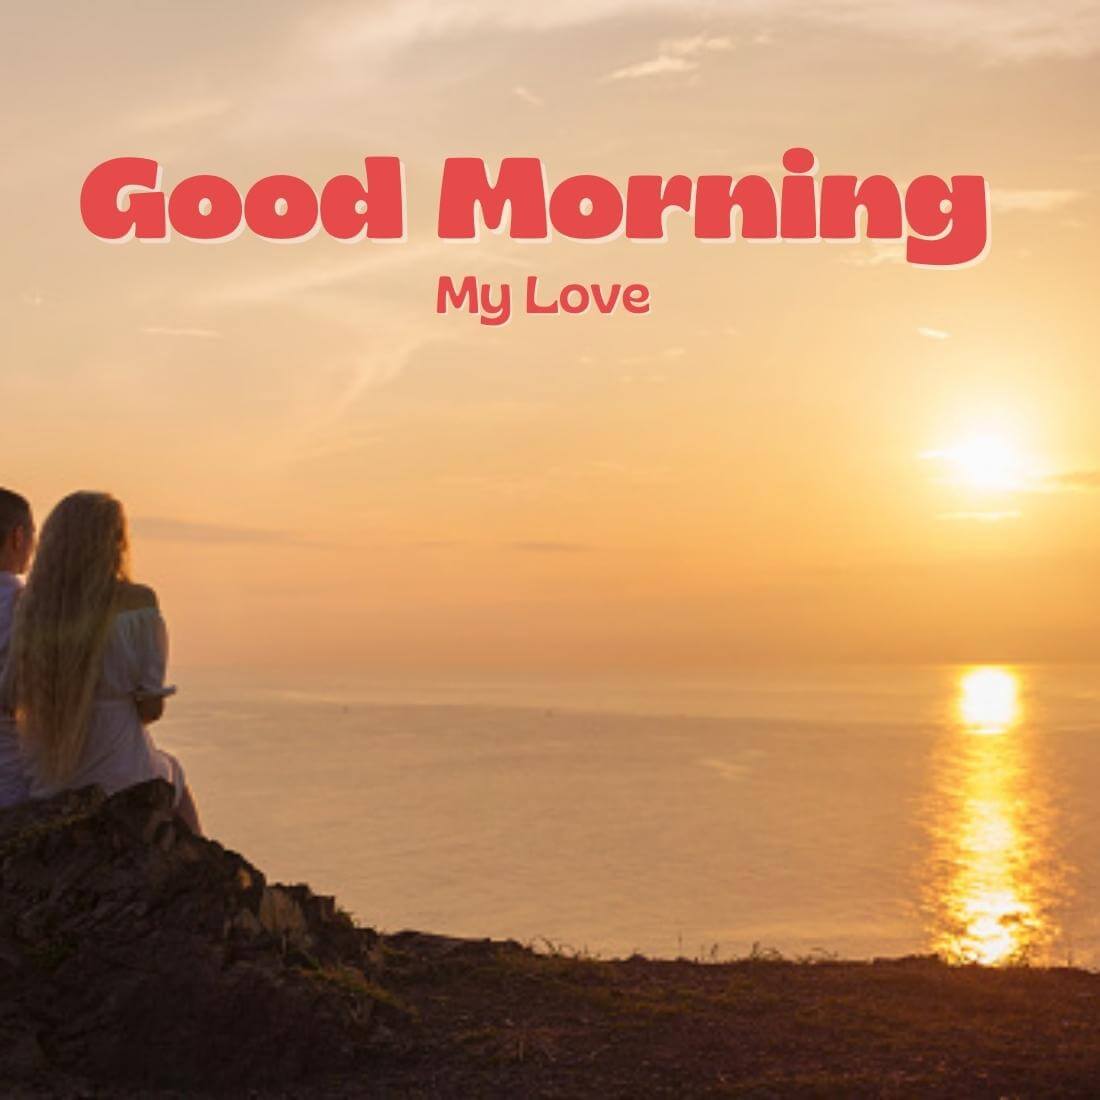 Good Morning Wallpaper Images With Sunrise